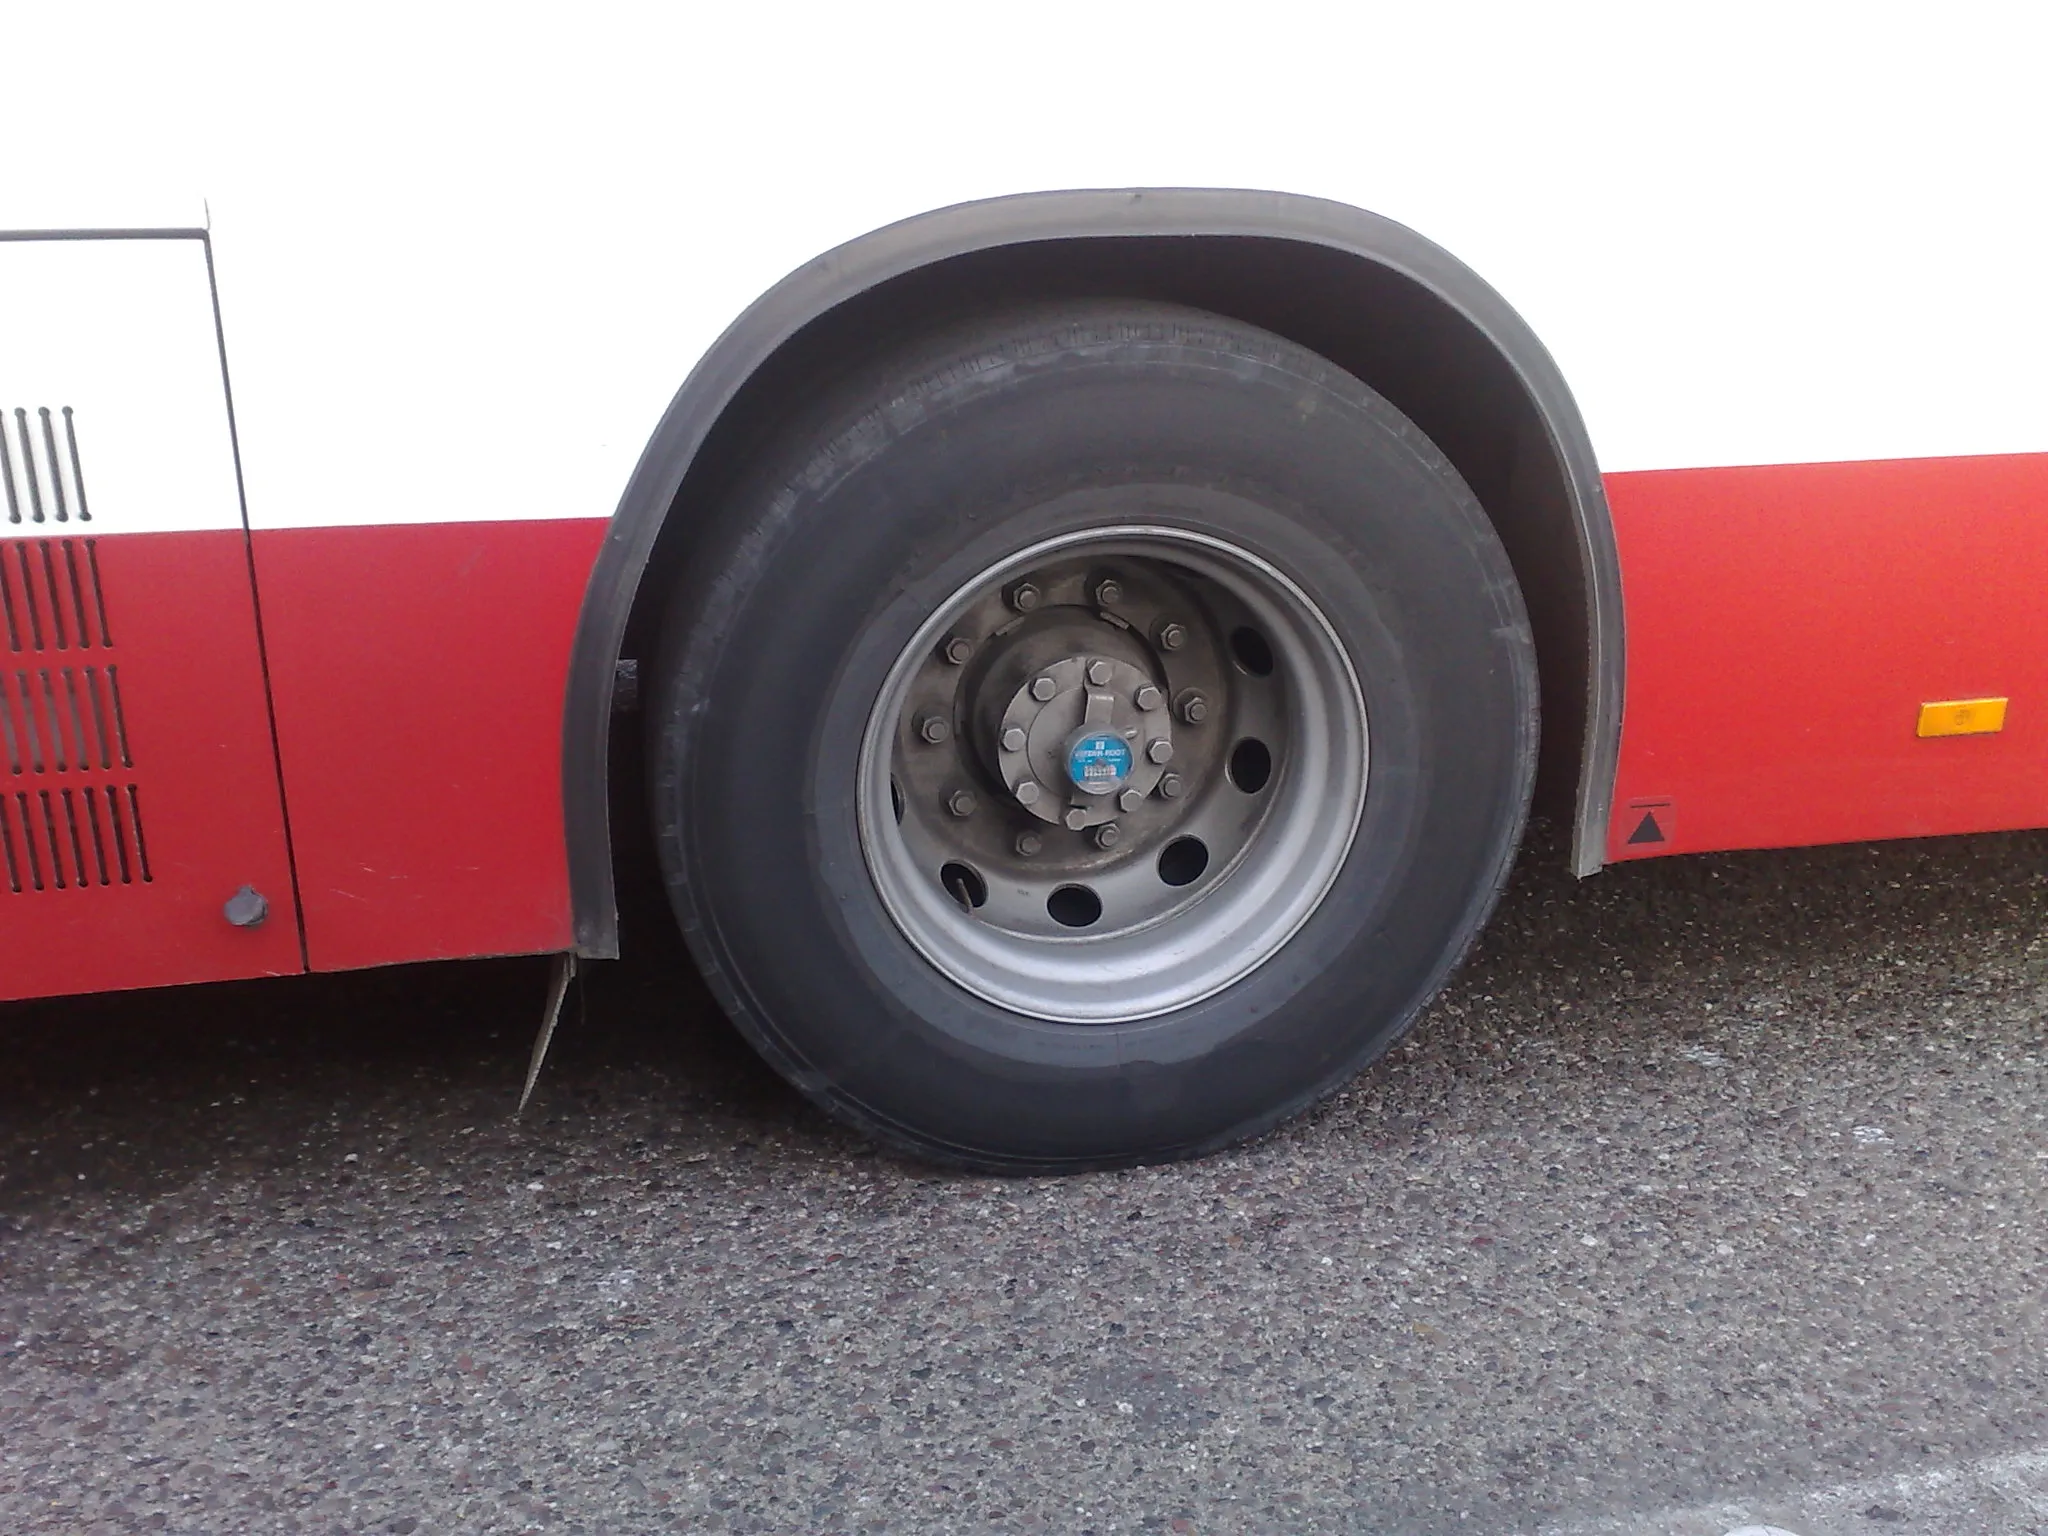 how many tyres in bus